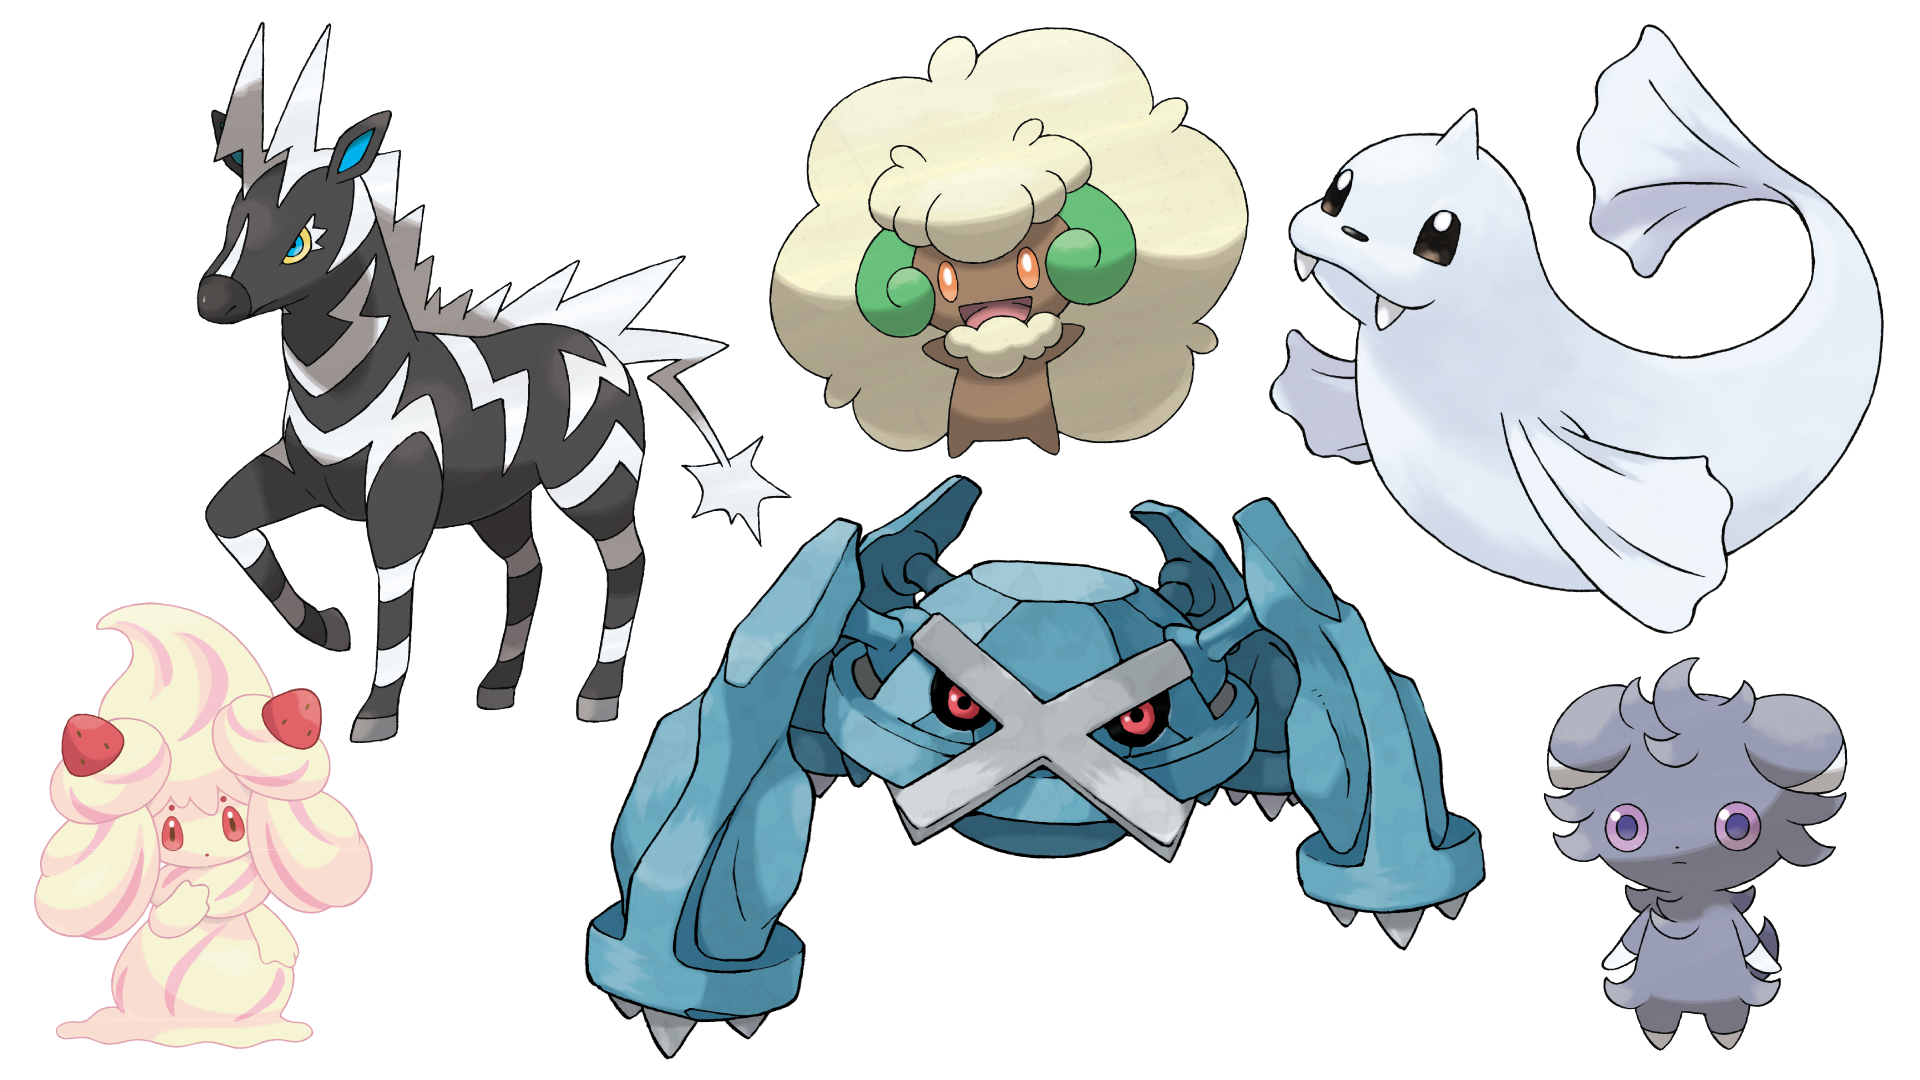 Pokémon fans experiment with playing as their creatures in Scarlet and Violet  DLC